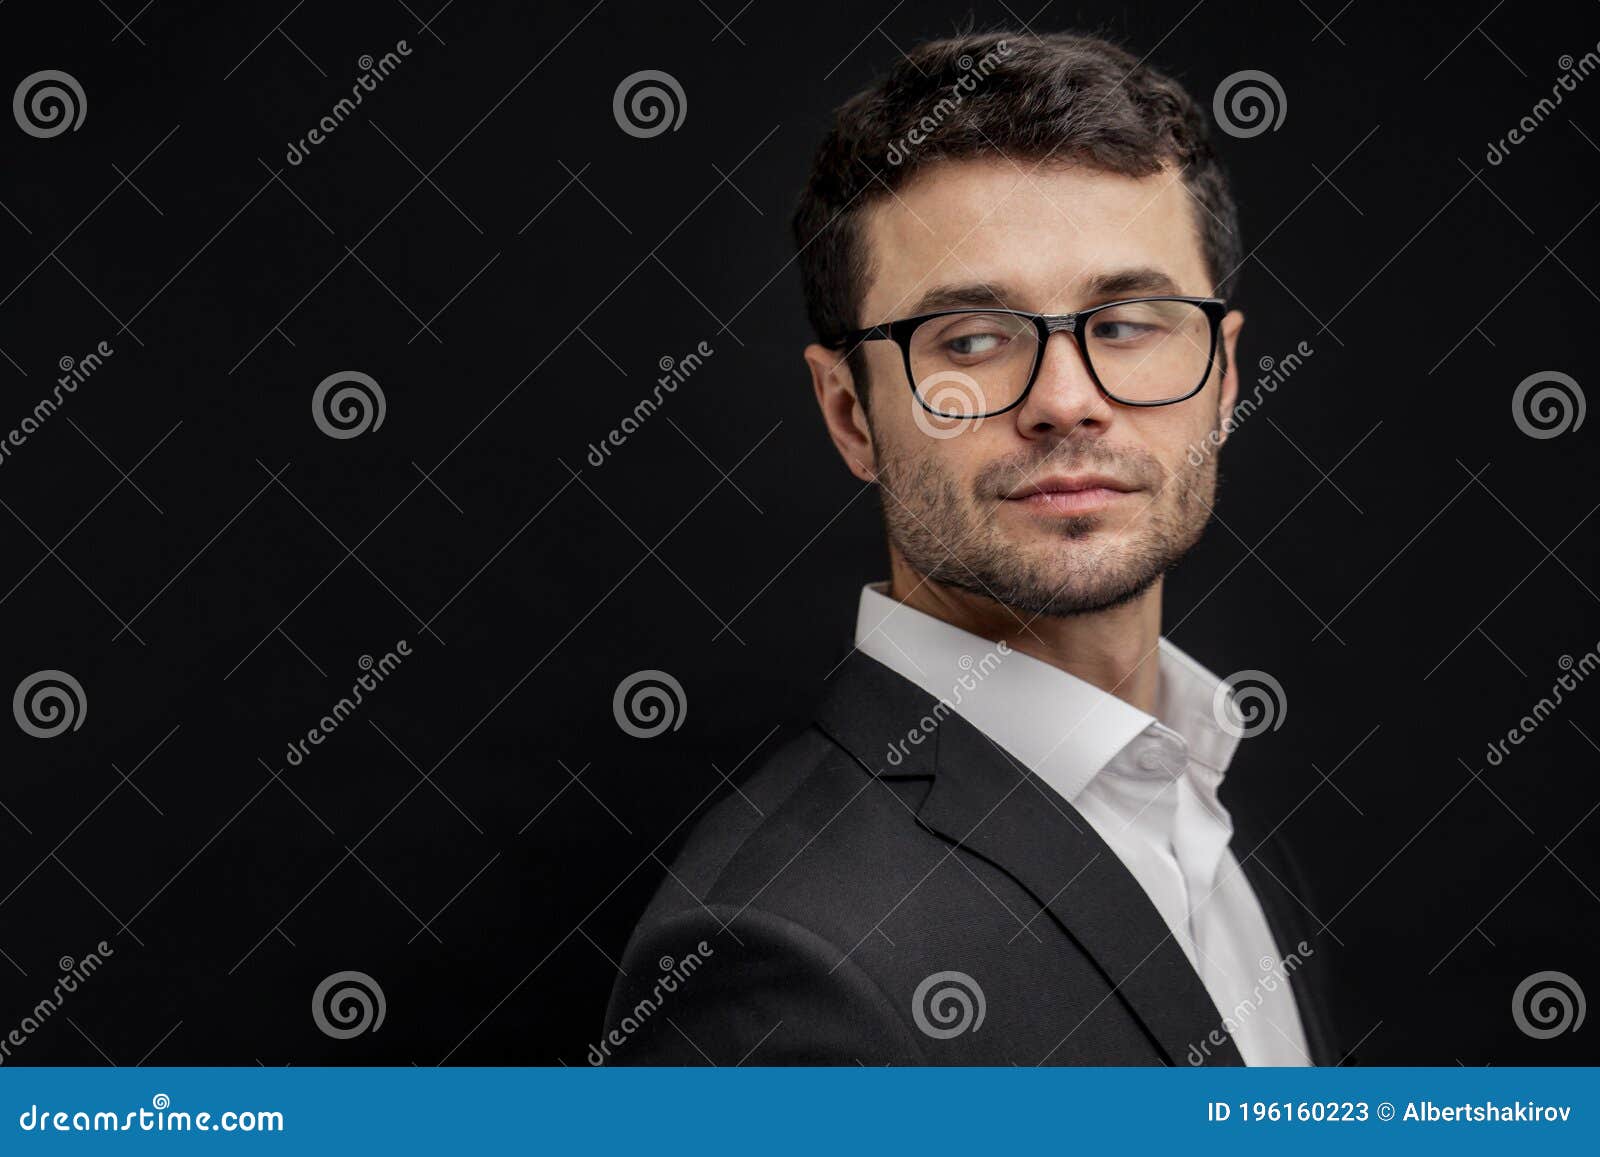 Close Up Side View Portrait of Young Attractive Businessman Looking ...